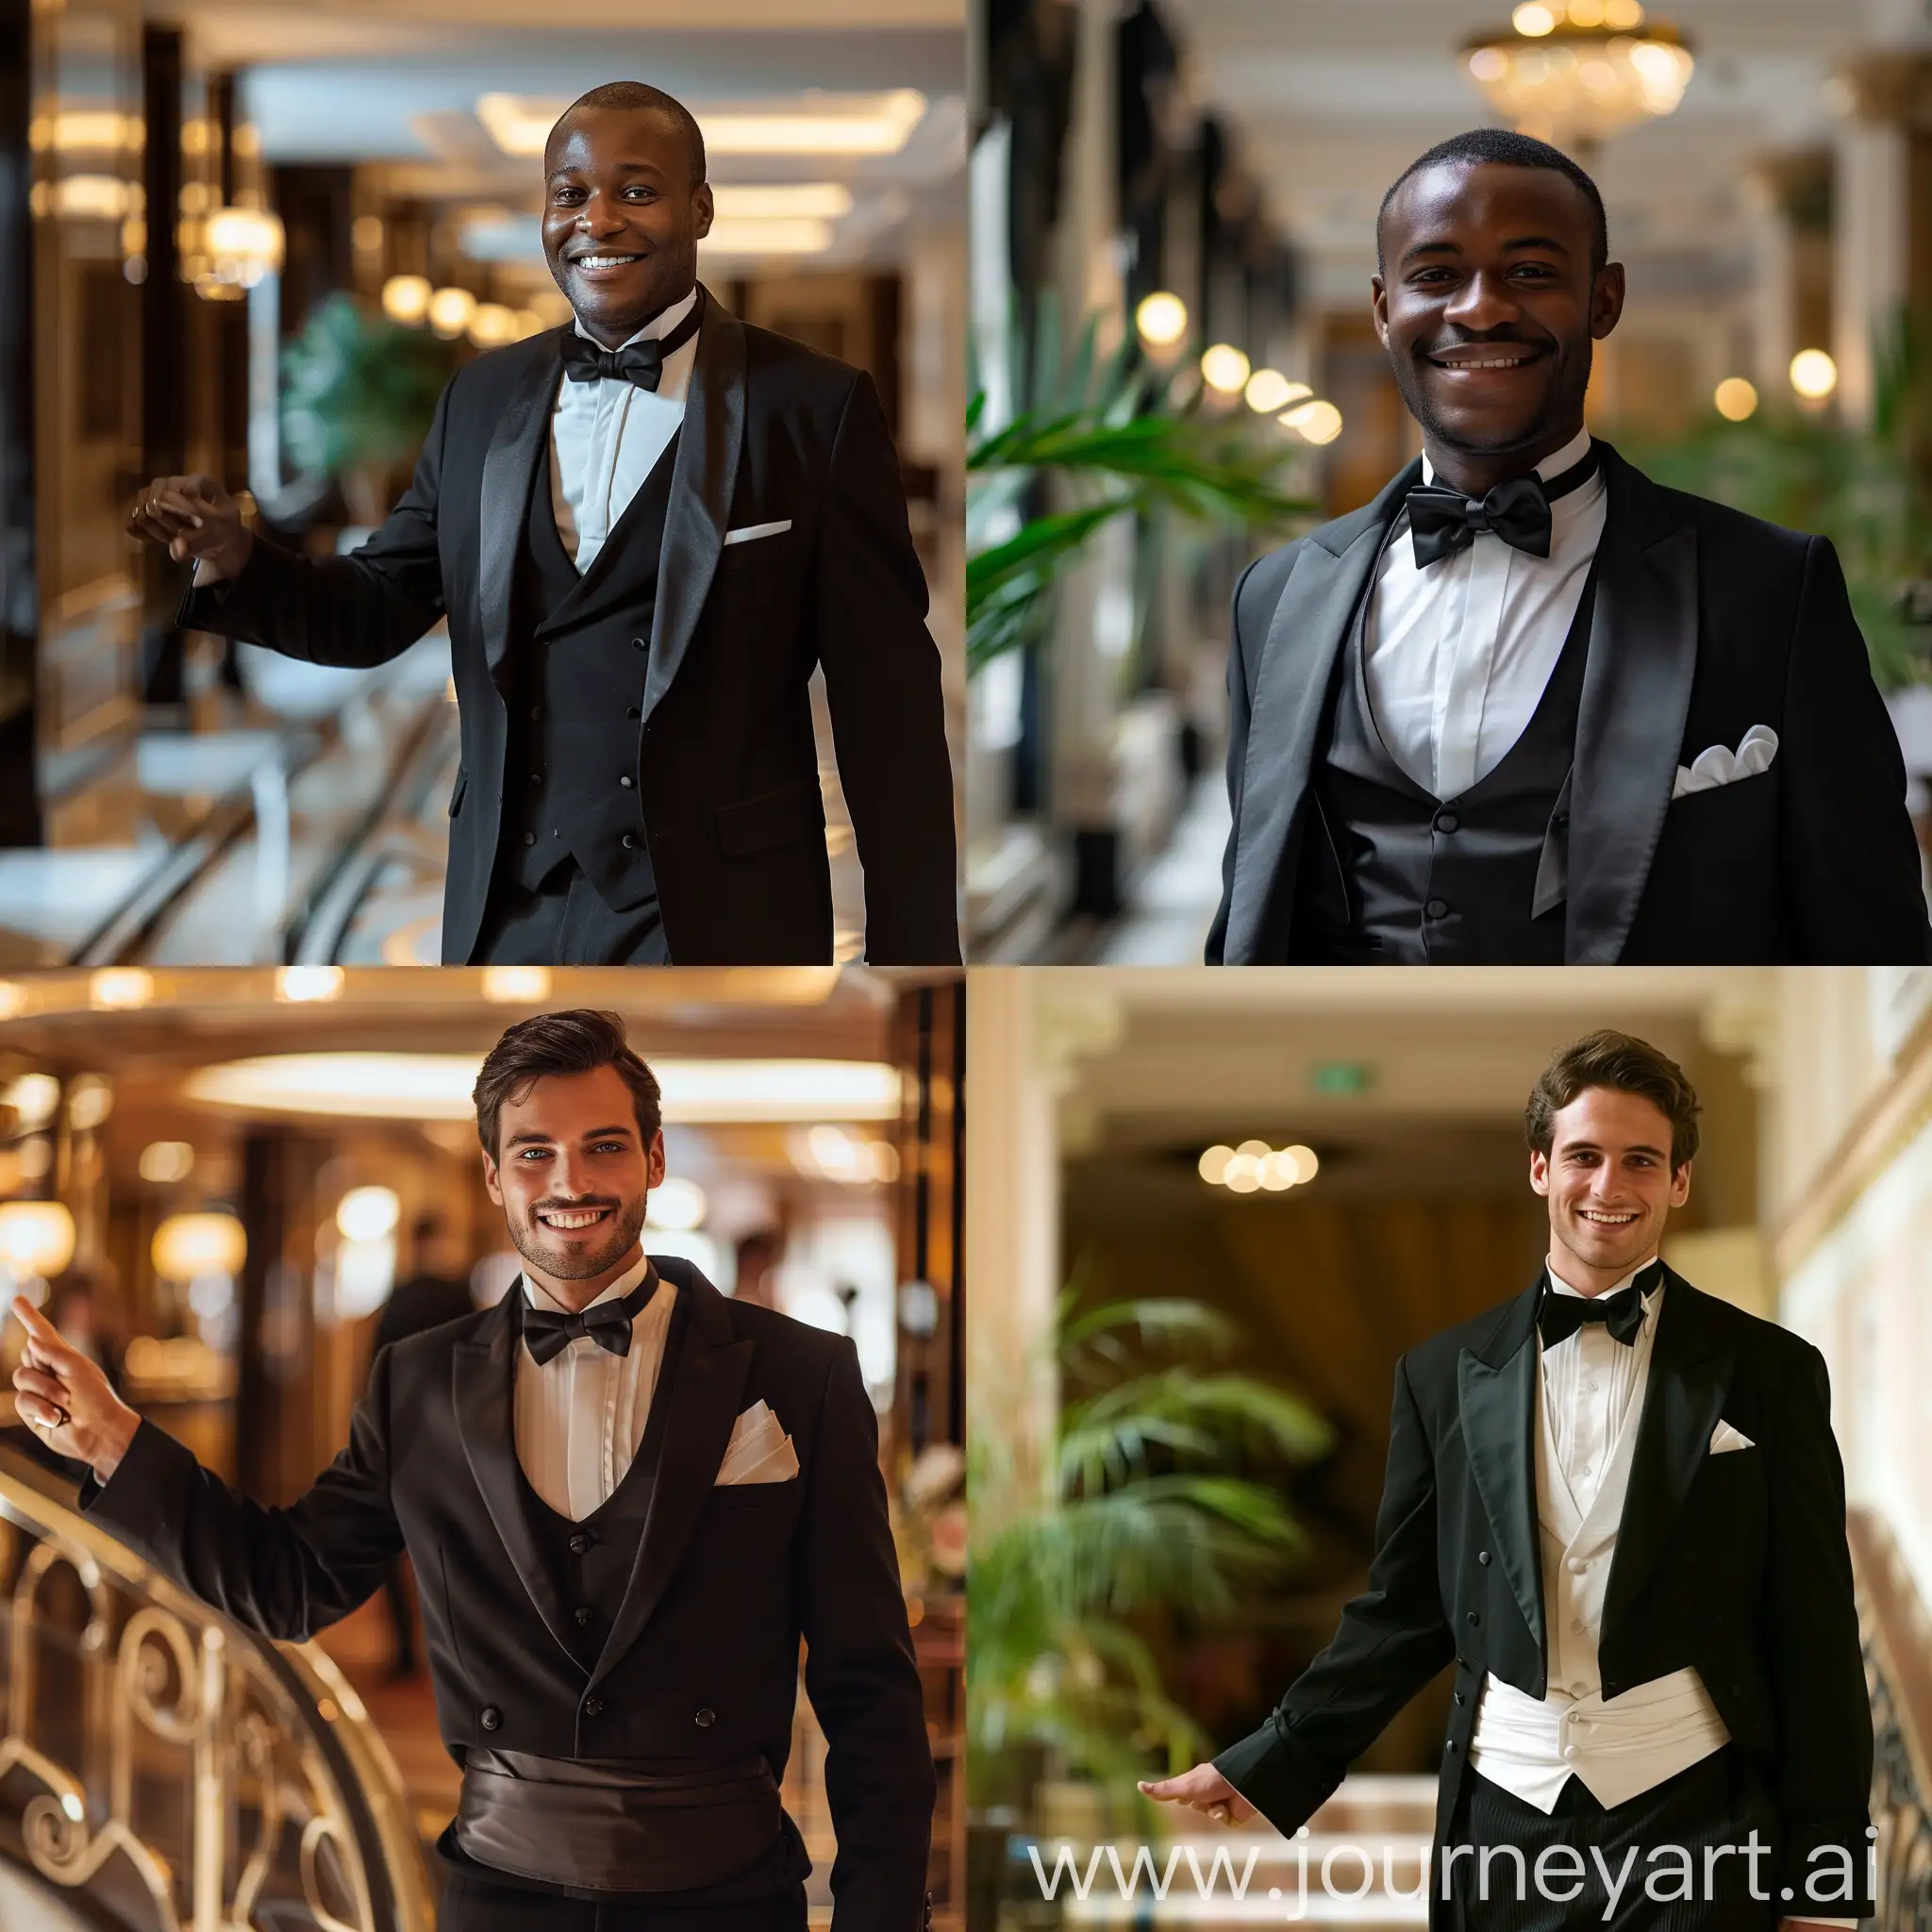 a butler showing the way in a welcoming fashion with a smile